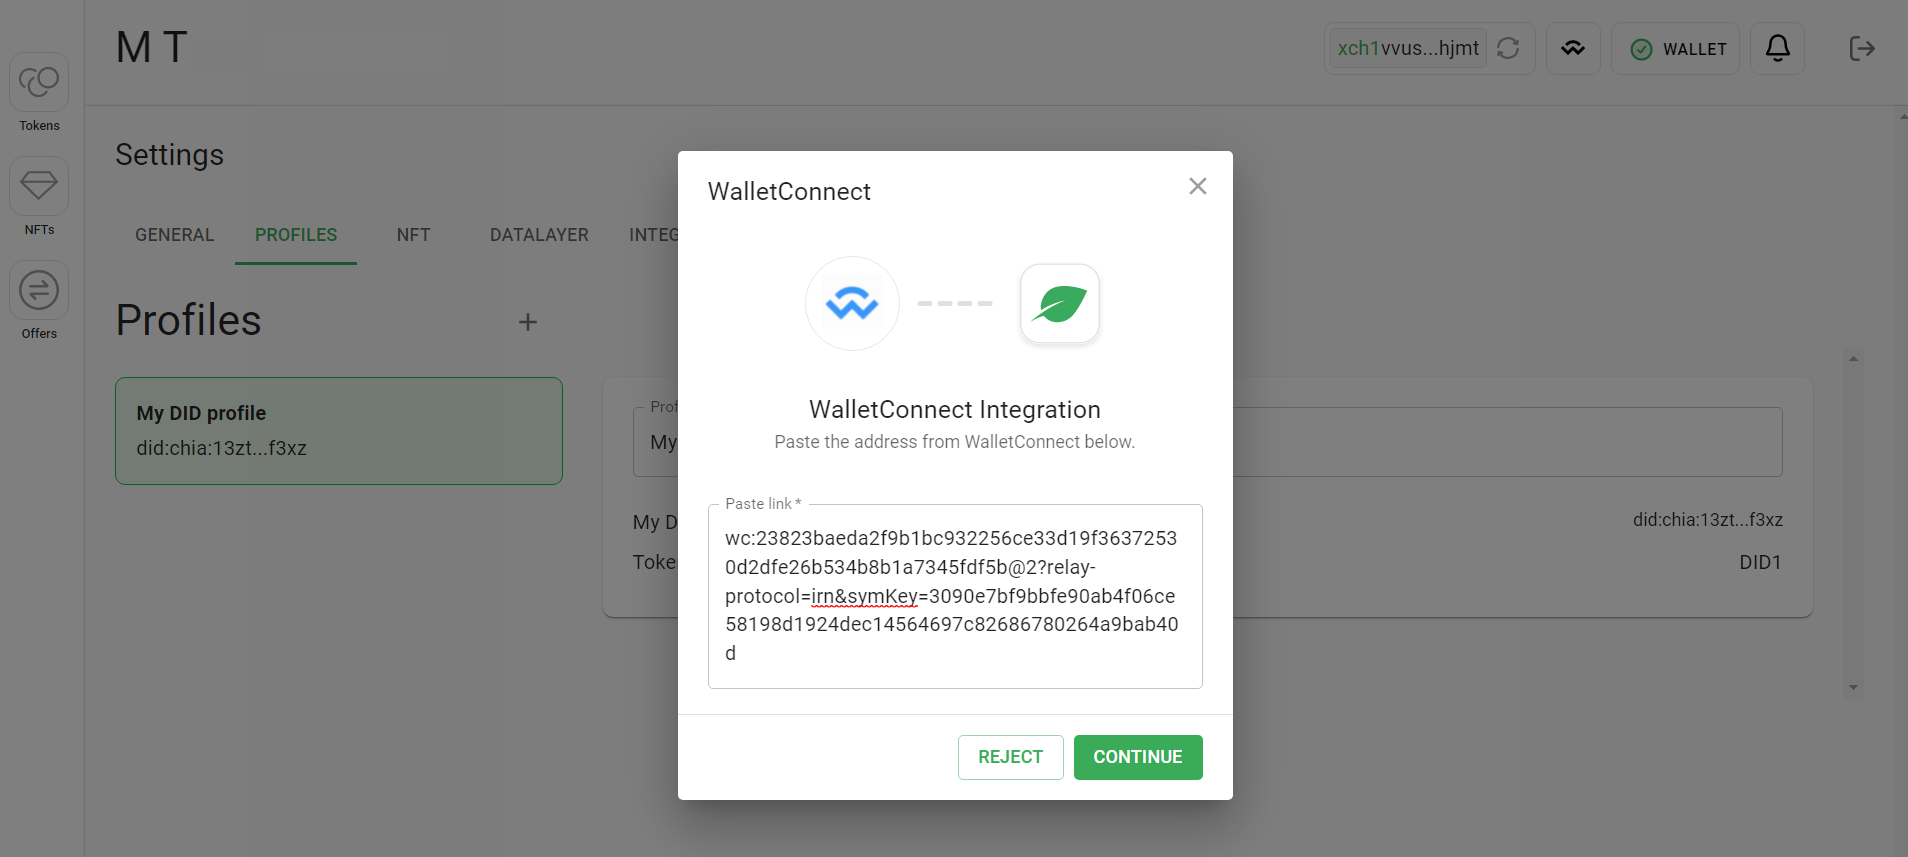 Chia wallet - wallet connect 2